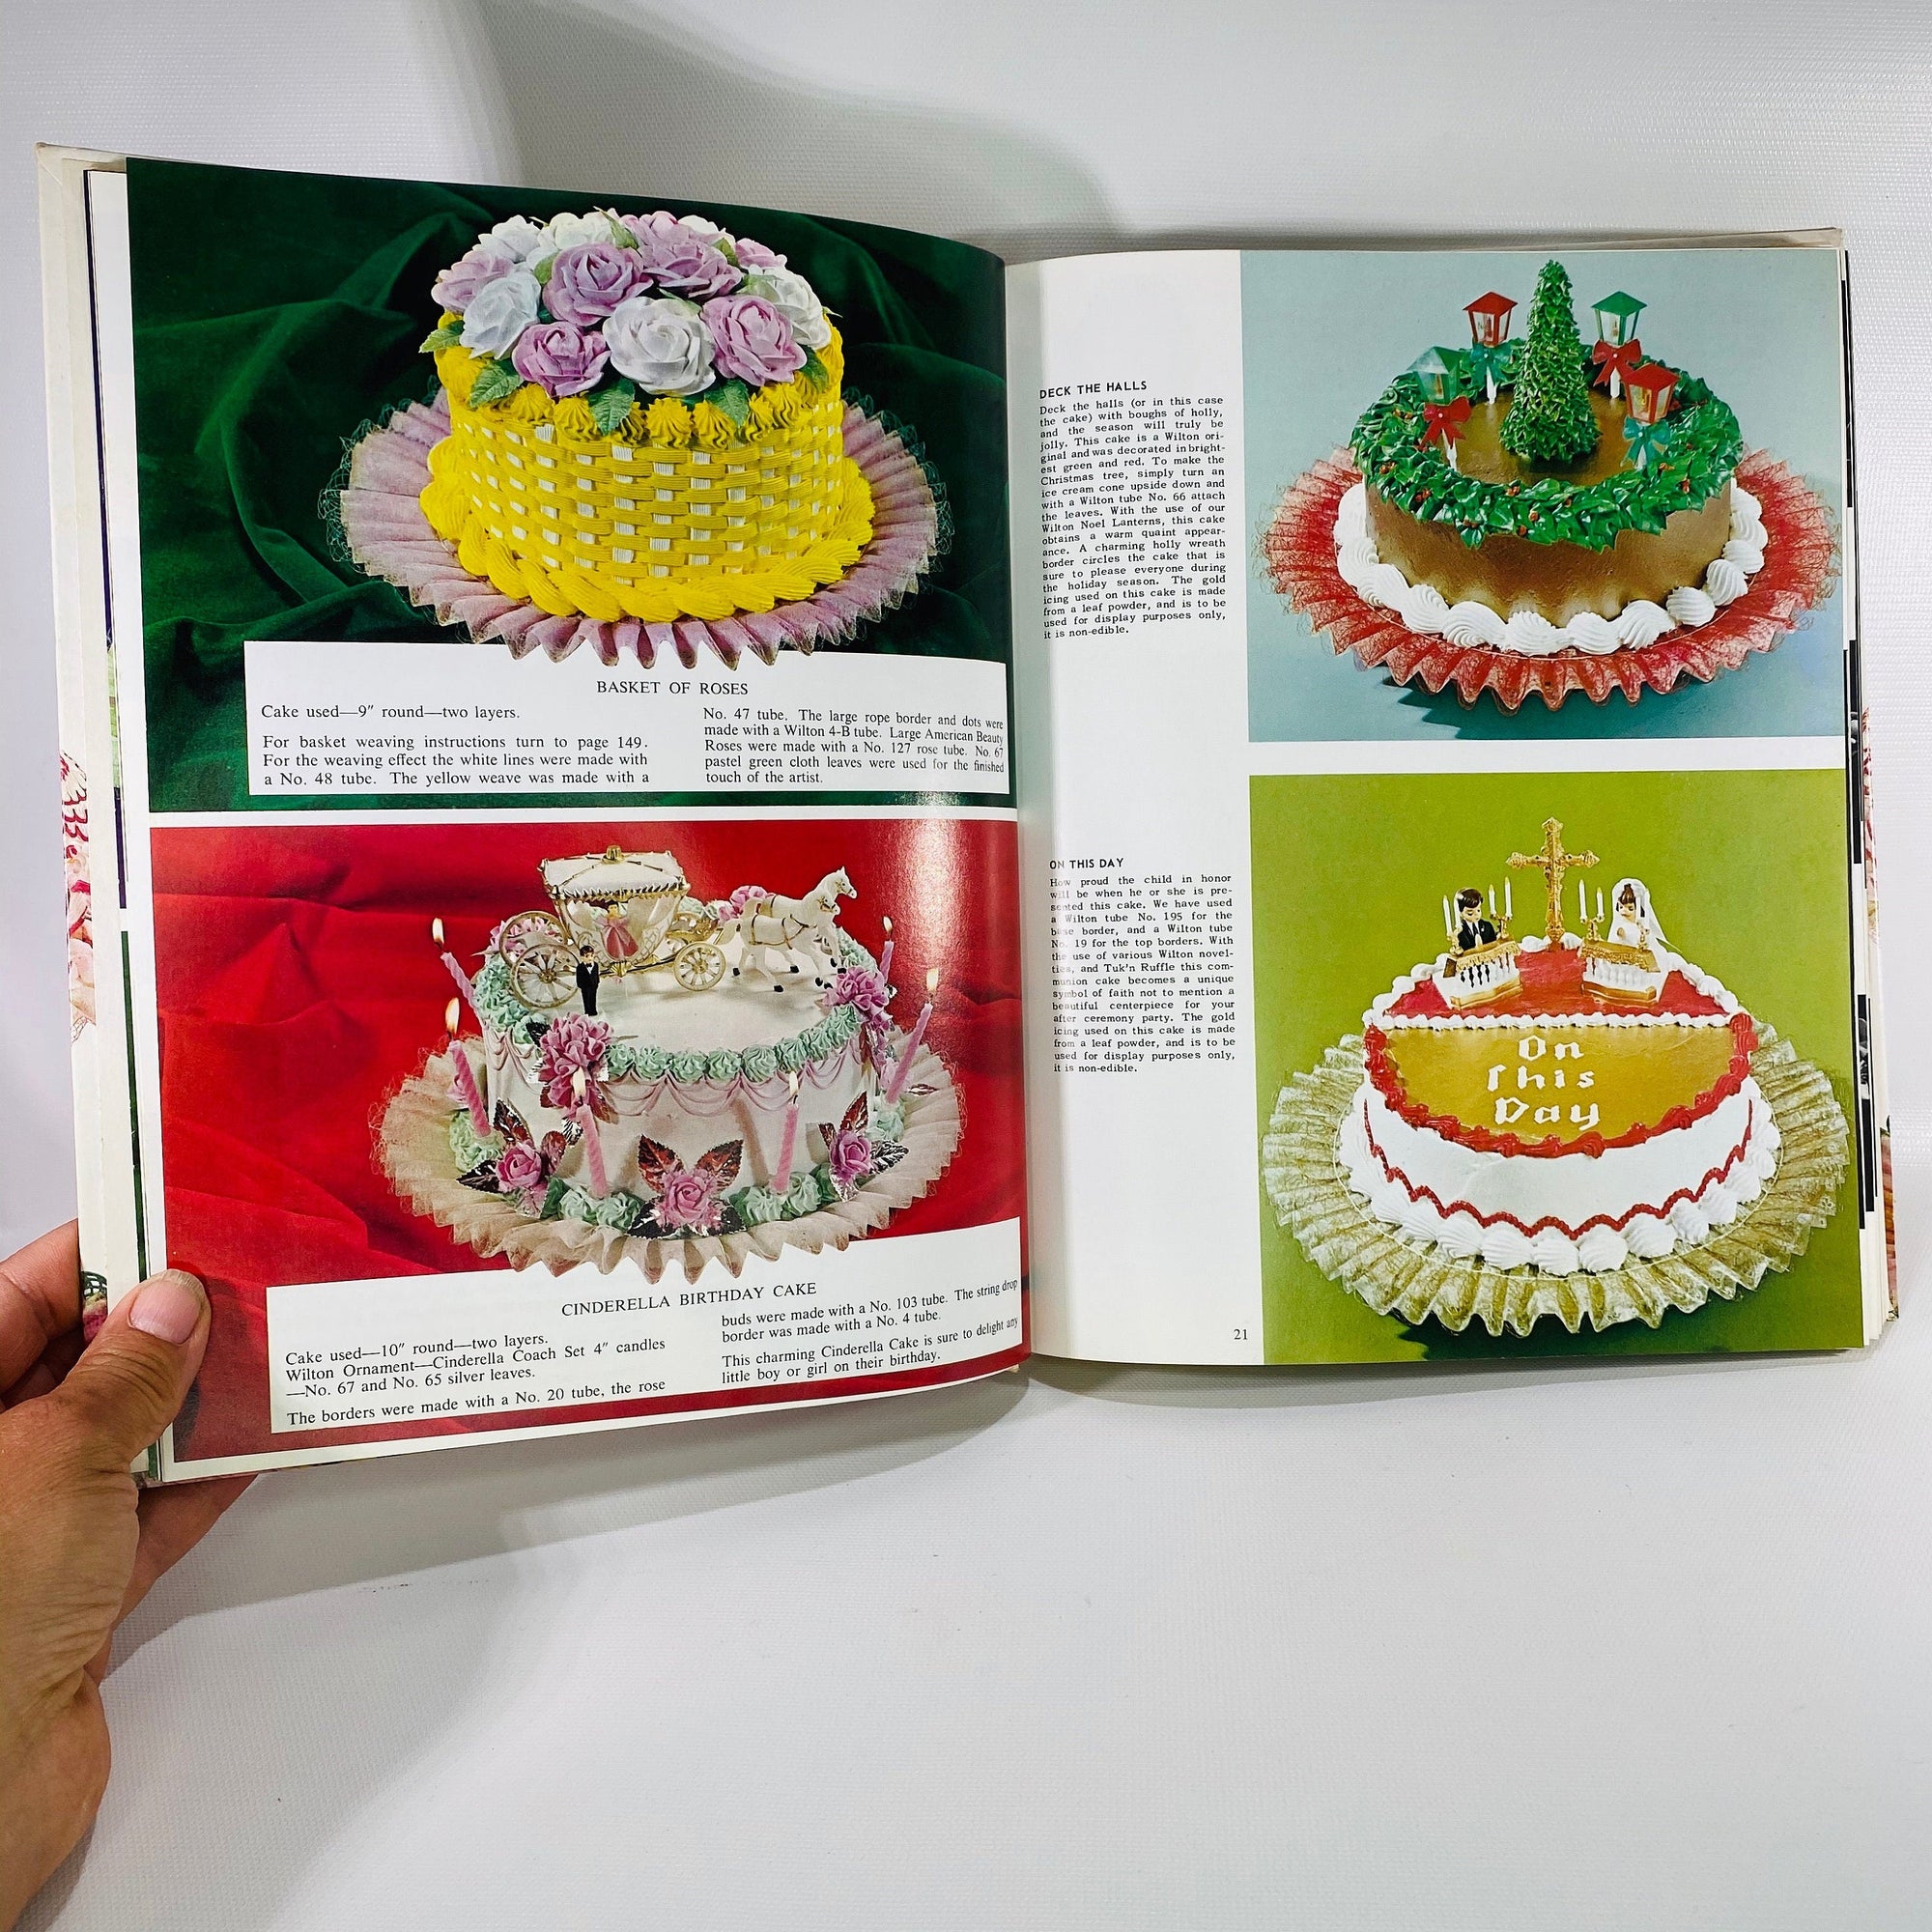 Professional French Pastry Series: Decorations, Borders and Letters,  Marzipan, and Modern Desserts: 4 (French Professional Pastry Series):  Amazon.co.uk: Bilheux, Roland, Escoffier, Alain, Poritzky-Lauvand, Rhona,  Peterson, James: 9780470250006: Books